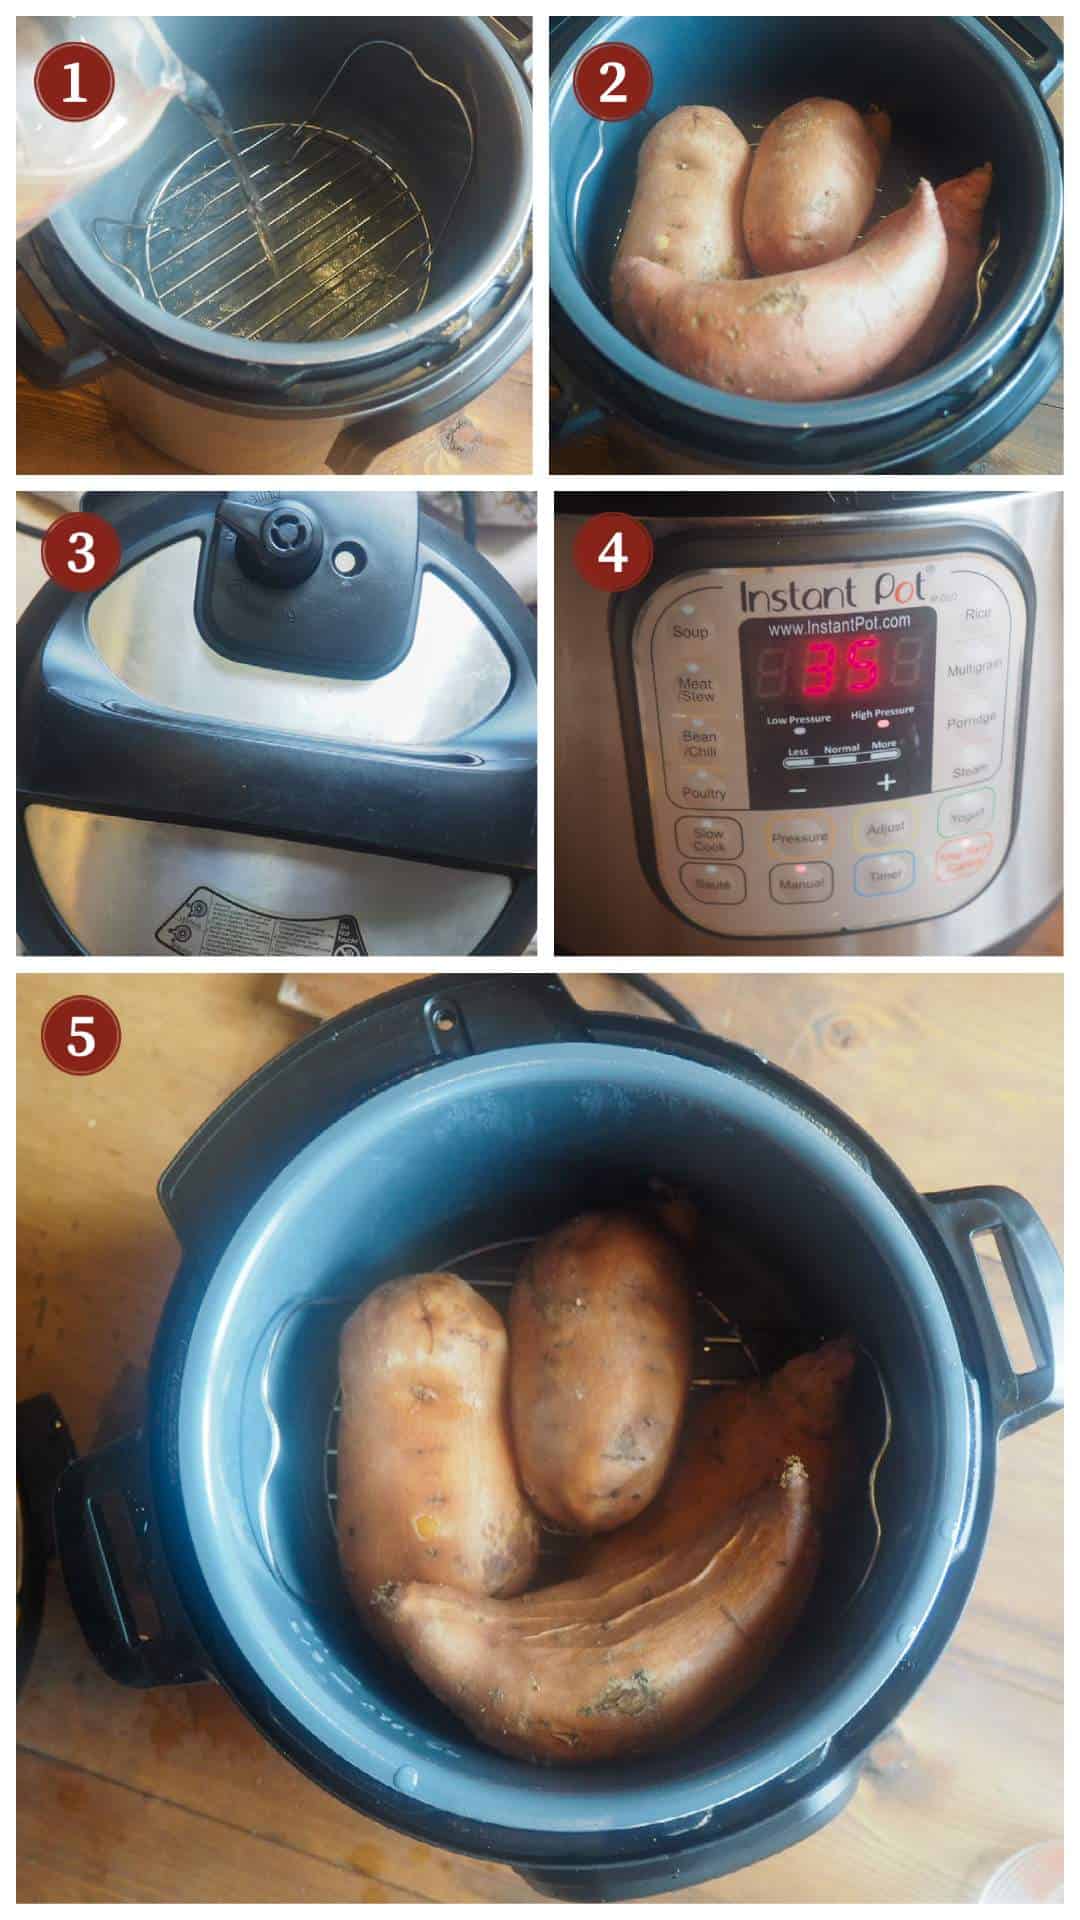 A collage of images showing how to cook sweet potatoes in an Instant Pot, steps 1 - 5.